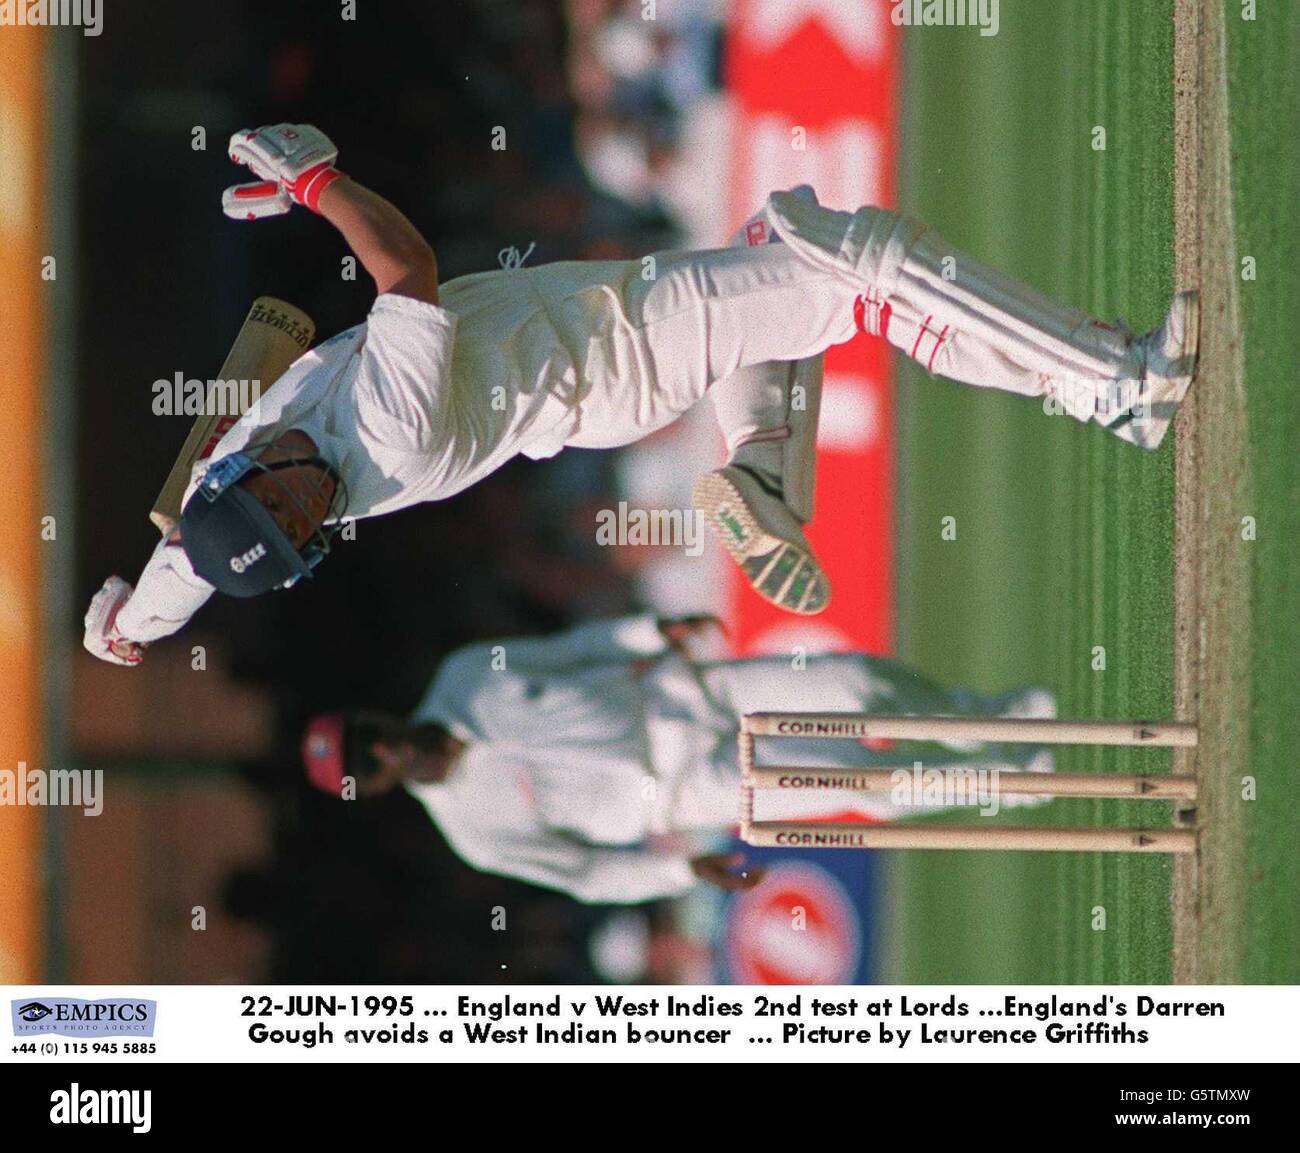 22-JUN-1995. England v West Indies 2nd test at Lords .England's Darren Gough avoids a West Indian bouncer. Picture by Laurence Griffiths Stock Photo